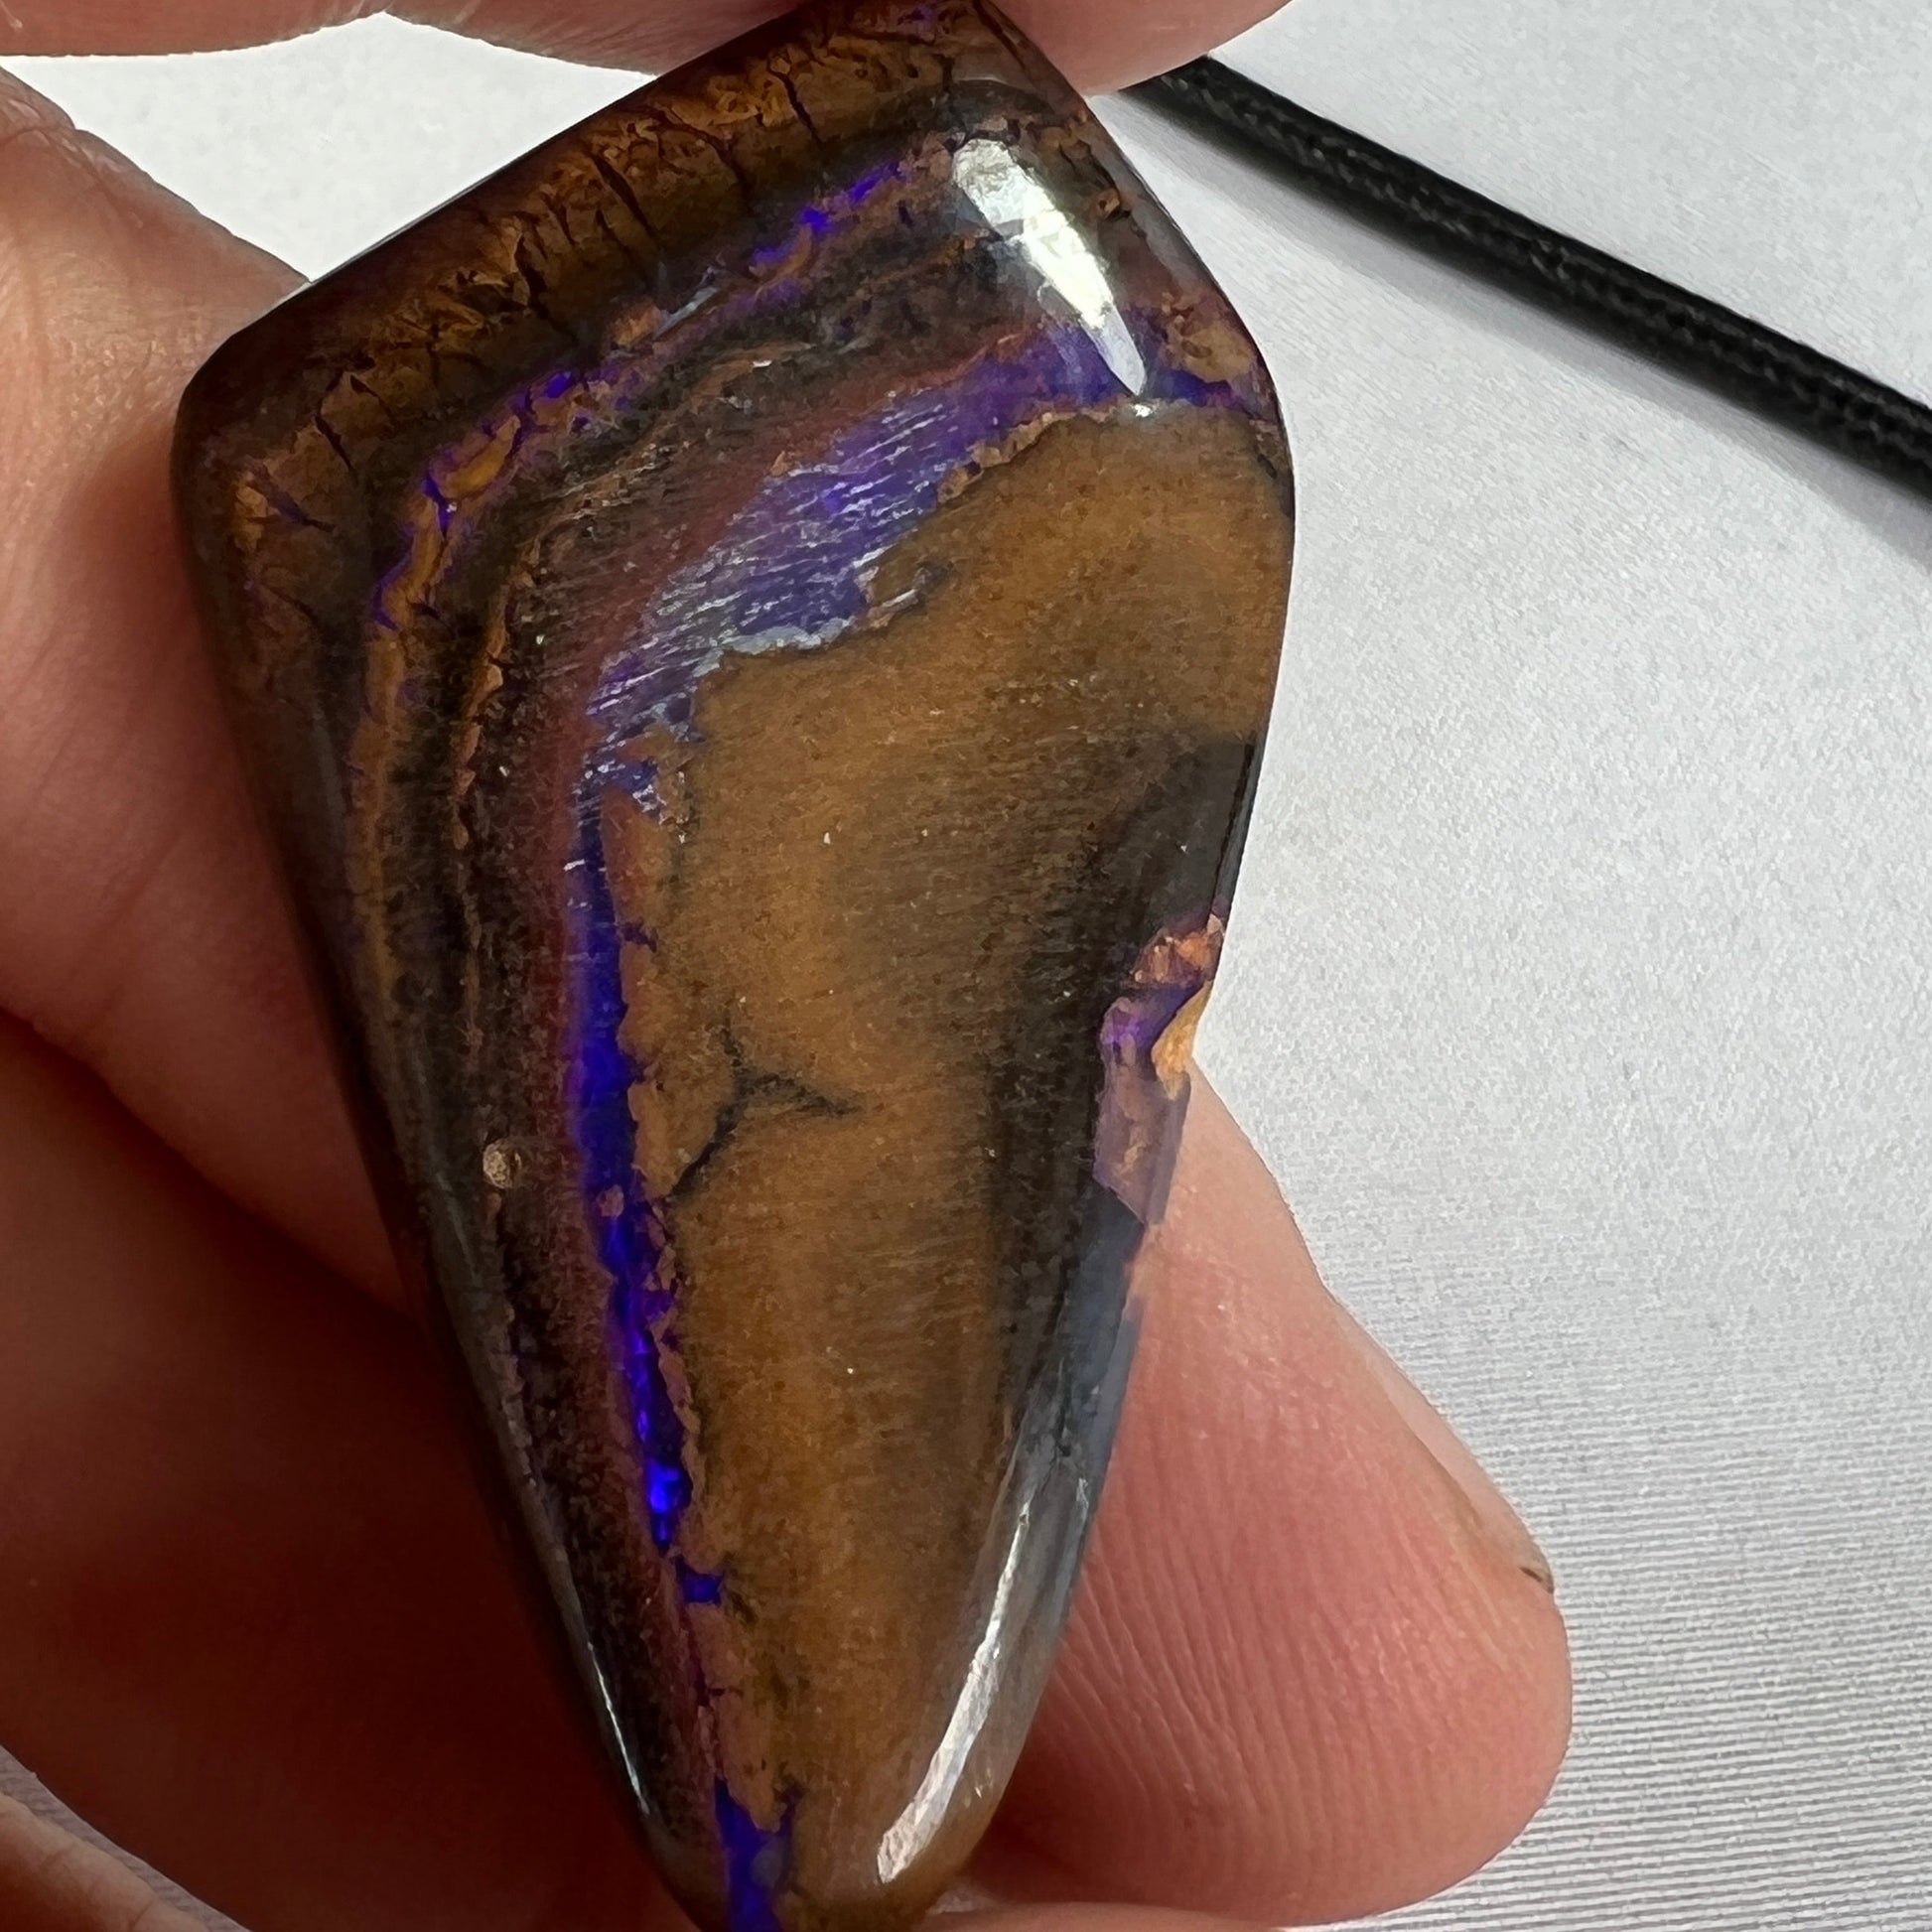 Nice chunky piece of boulder opal from Winton. Would make a great pendant.